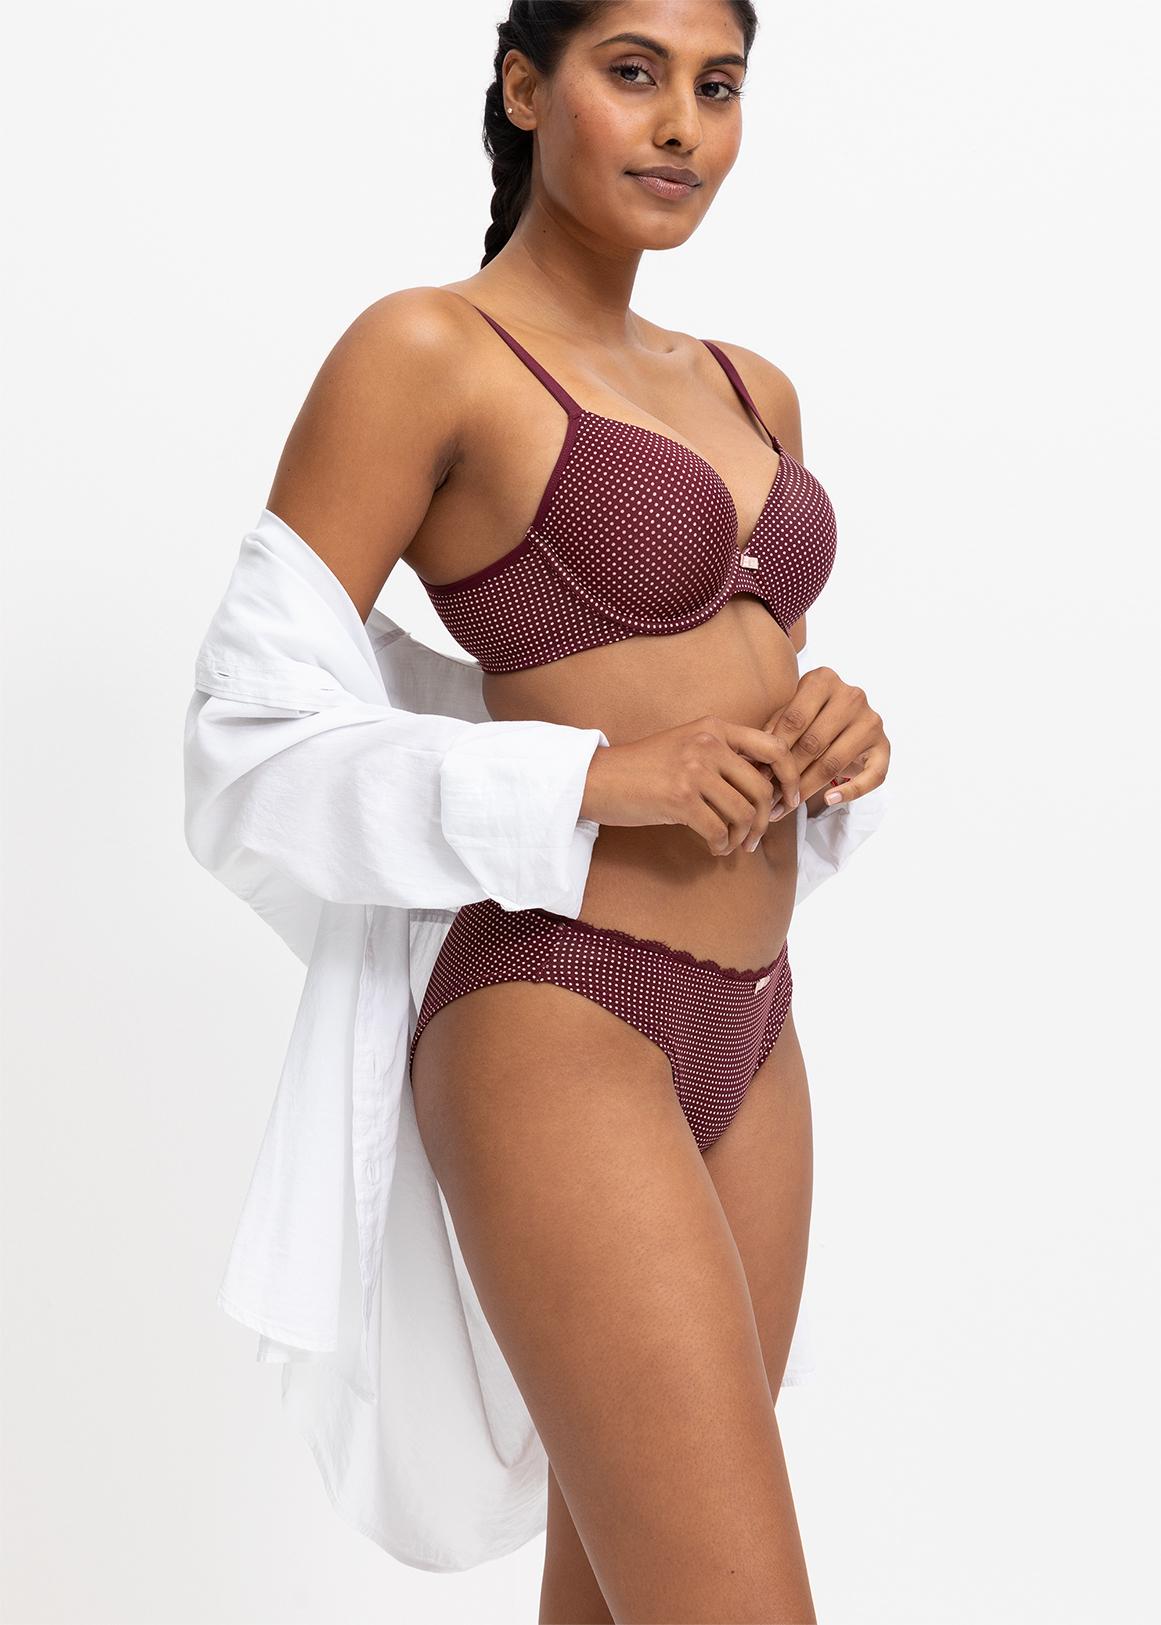 WOOLWORTHS SA  Our Perfect T-shirt Bra is the total package